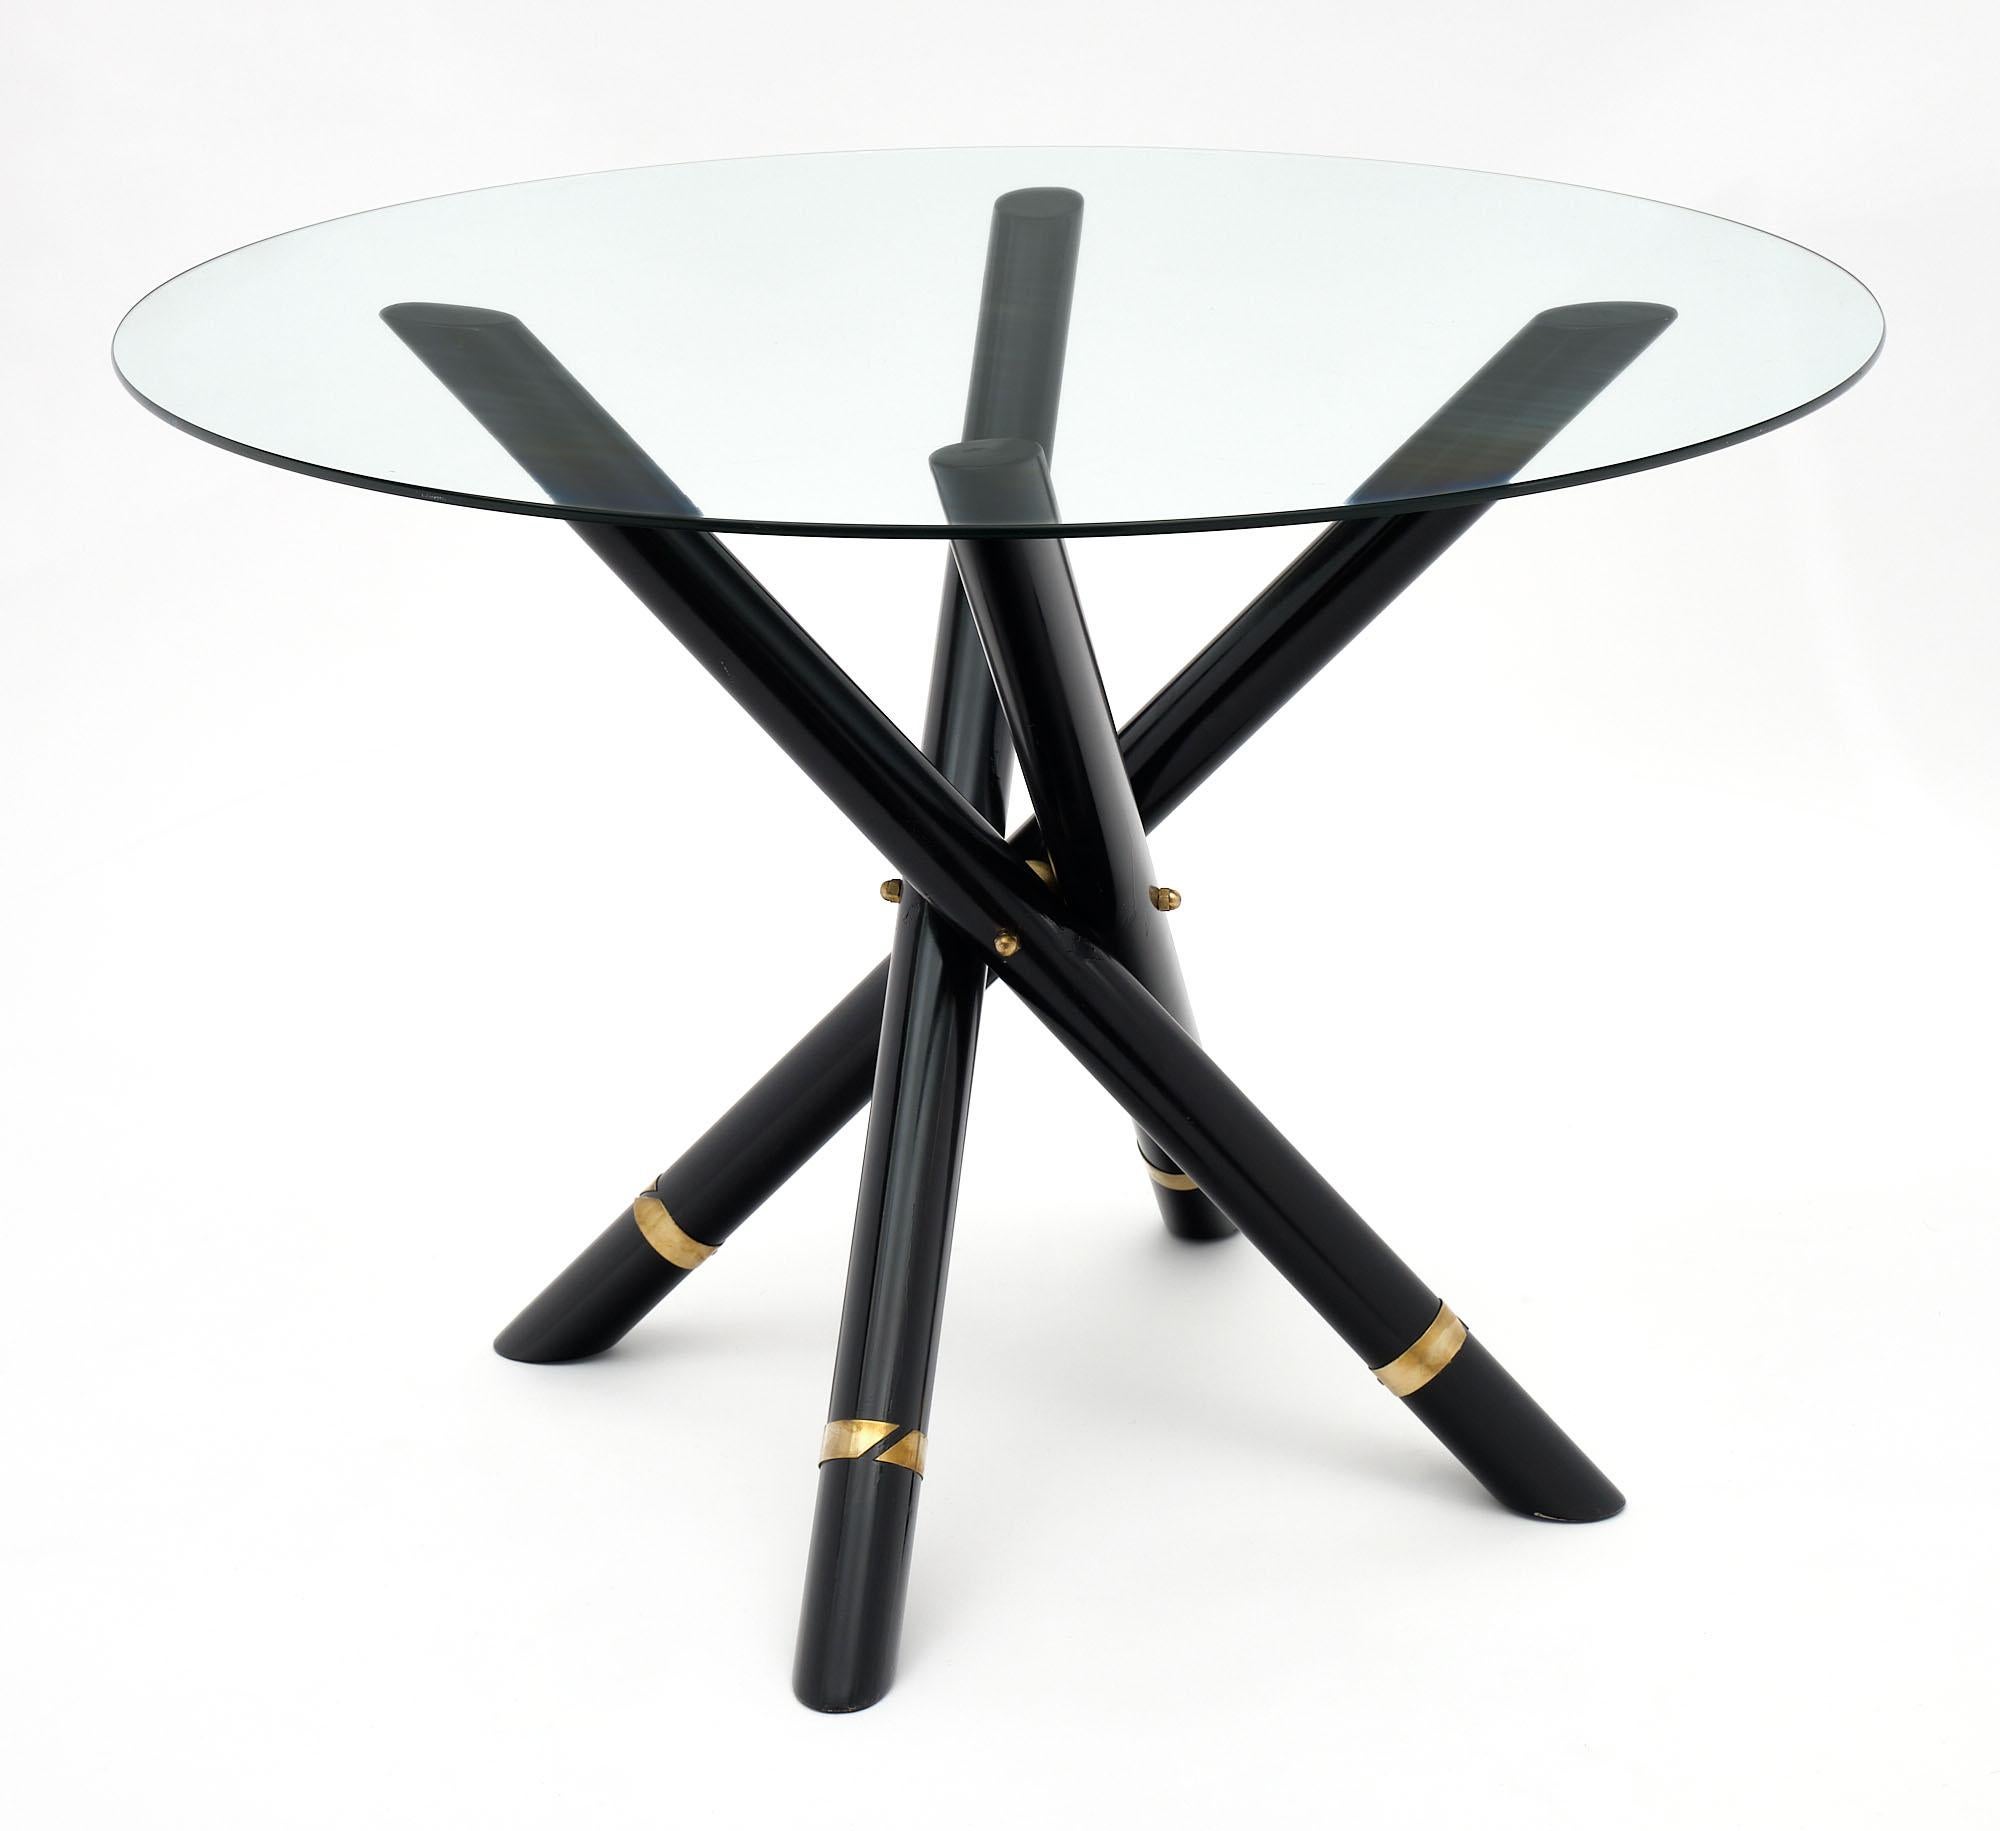 Late 20th Century French Modernist Dining Table